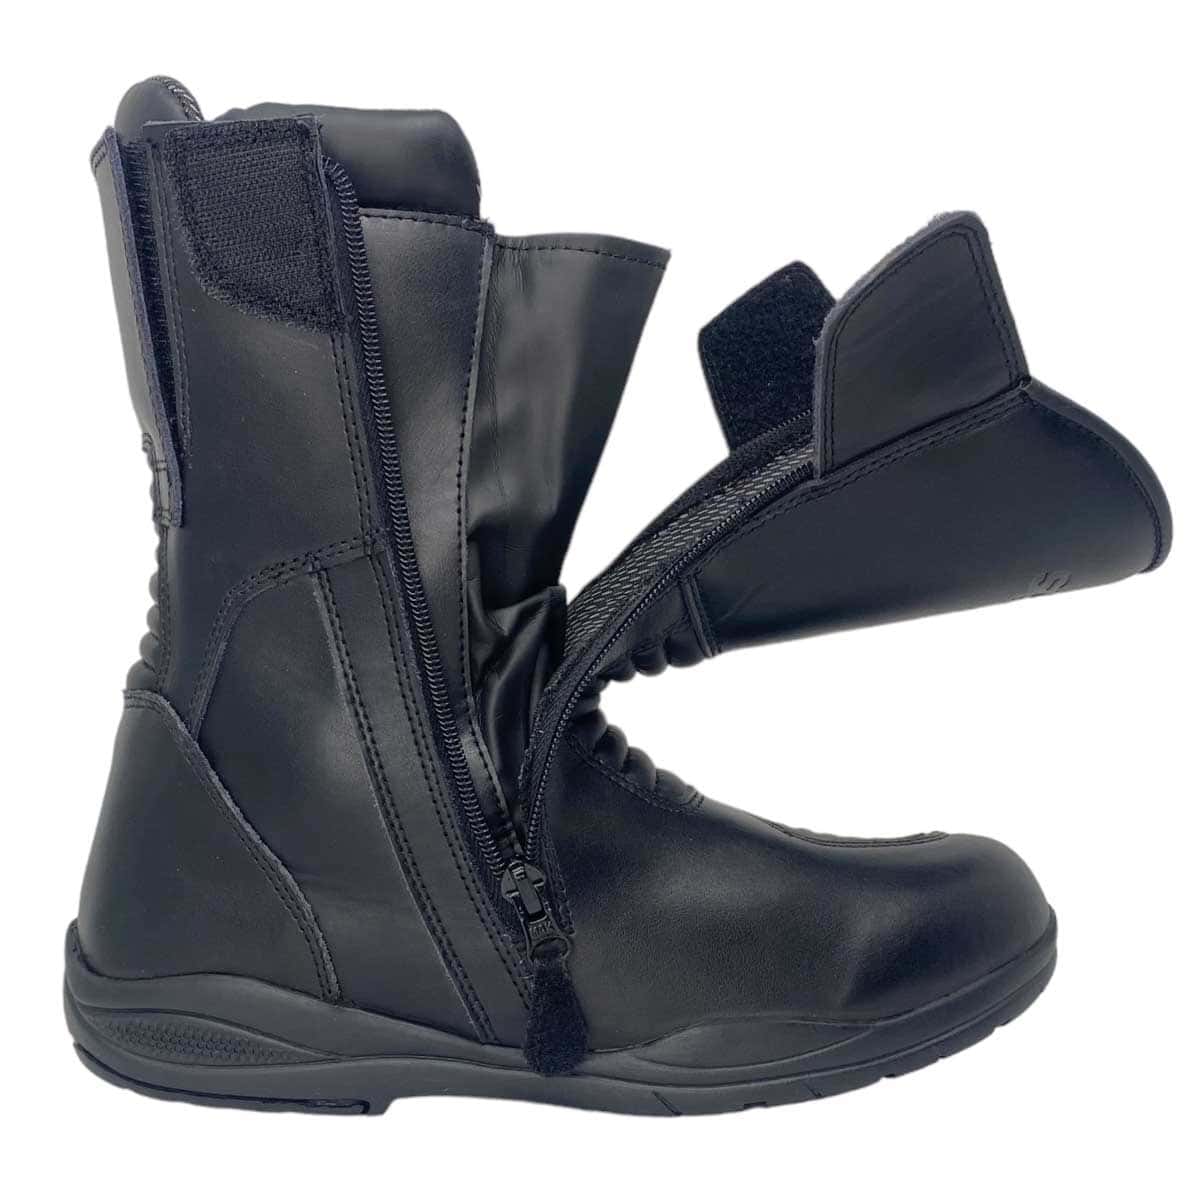 Spada Hurricane 3 CE WP Boots Specifications - Opening 